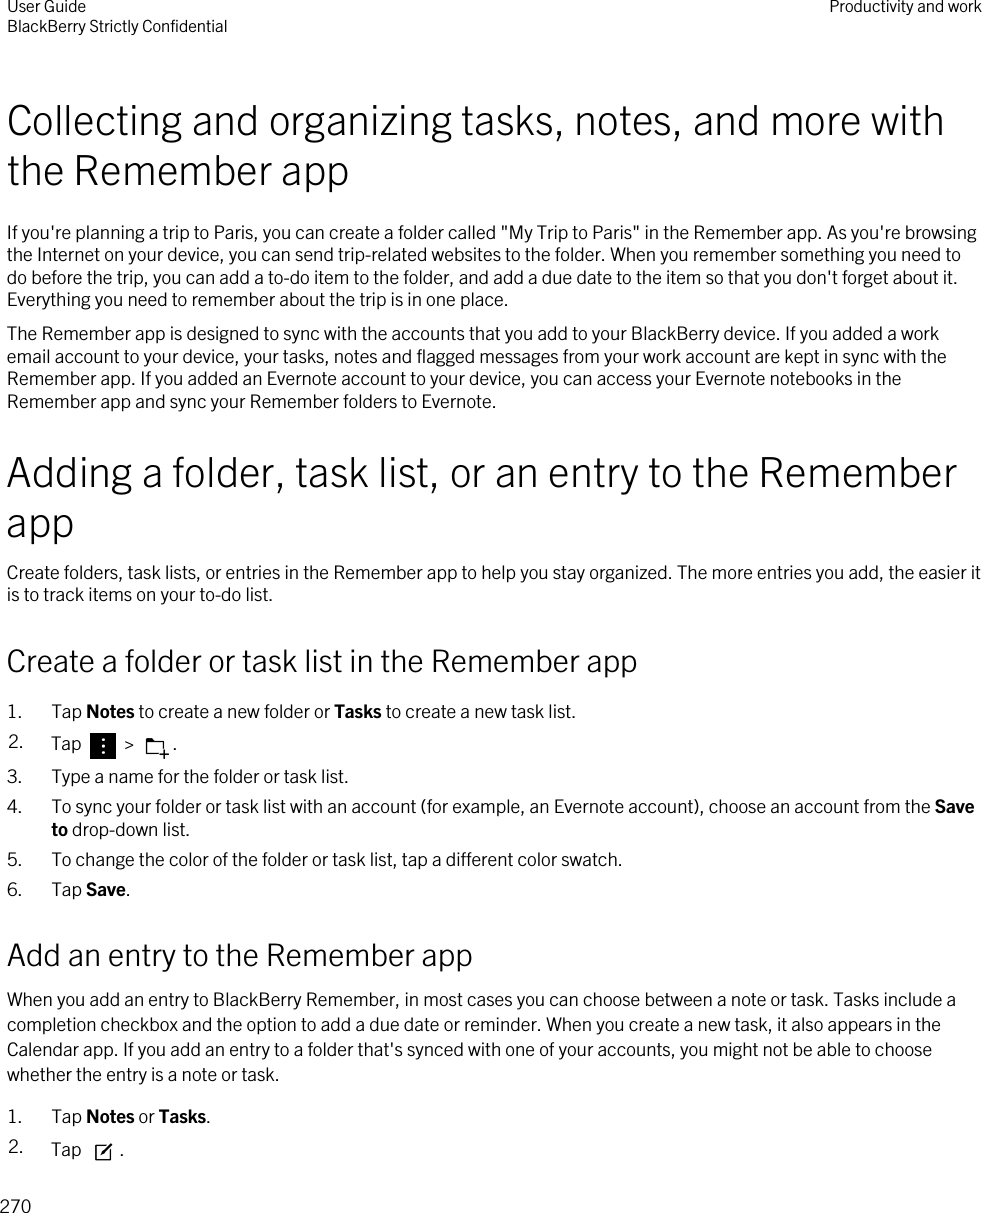 Collecting and organizing tasks, notes, and more with the Remember appIf you&apos;re planning a trip to Paris, you can create a folder called &quot;My Trip to Paris&quot; in the Remember app. As you&apos;re browsing the Internet on your device, you can send trip-related websites to the folder. When you remember something you need to do before the trip, you can add a to-do item to the folder, and add a due date to the item so that you don&apos;t forget about it. Everything you need to remember about the trip is in one place.The Remember app is designed to sync with the accounts that you add to your BlackBerry device. If you added a work email account to your device, your tasks, notes and flagged messages from your work account are kept in sync with the Remember app. If you added an Evernote account to your device, you can access your Evernote notebooks in the Remember app and sync your Remember folders to Evernote.Adding a folder, task list, or an entry to the Remember appCreate folders, task lists, or entries in the Remember app to help you stay organized. The more entries you add, the easier it is to track items on your to-do list.Create a folder or task list in the Remember app1. Tap Notes to create a new folder or Tasks to create a new task list.2. Tap   &gt;  .3. Type a name for the folder or task list.4. To sync your folder or task list with an account (for example, an Evernote account), choose an account from the Save to drop-down list.5. To change the color of the folder or task list, tap a different color swatch.6. Tap Save.Add an entry to the Remember appWhen you add an entry to BlackBerry Remember, in most cases you can choose between a note or task. Tasks include a completion checkbox and the option to add a due date or reminder. When you create a new task, it also appears in the Calendar app. If you add an entry to a folder that&apos;s synced with one of your accounts, you might not be able to choose whether the entry is a note or task.1. Tap Notes or Tasks.2. Tap  .User GuideBlackBerry Strictly Confidential Productivity and work270